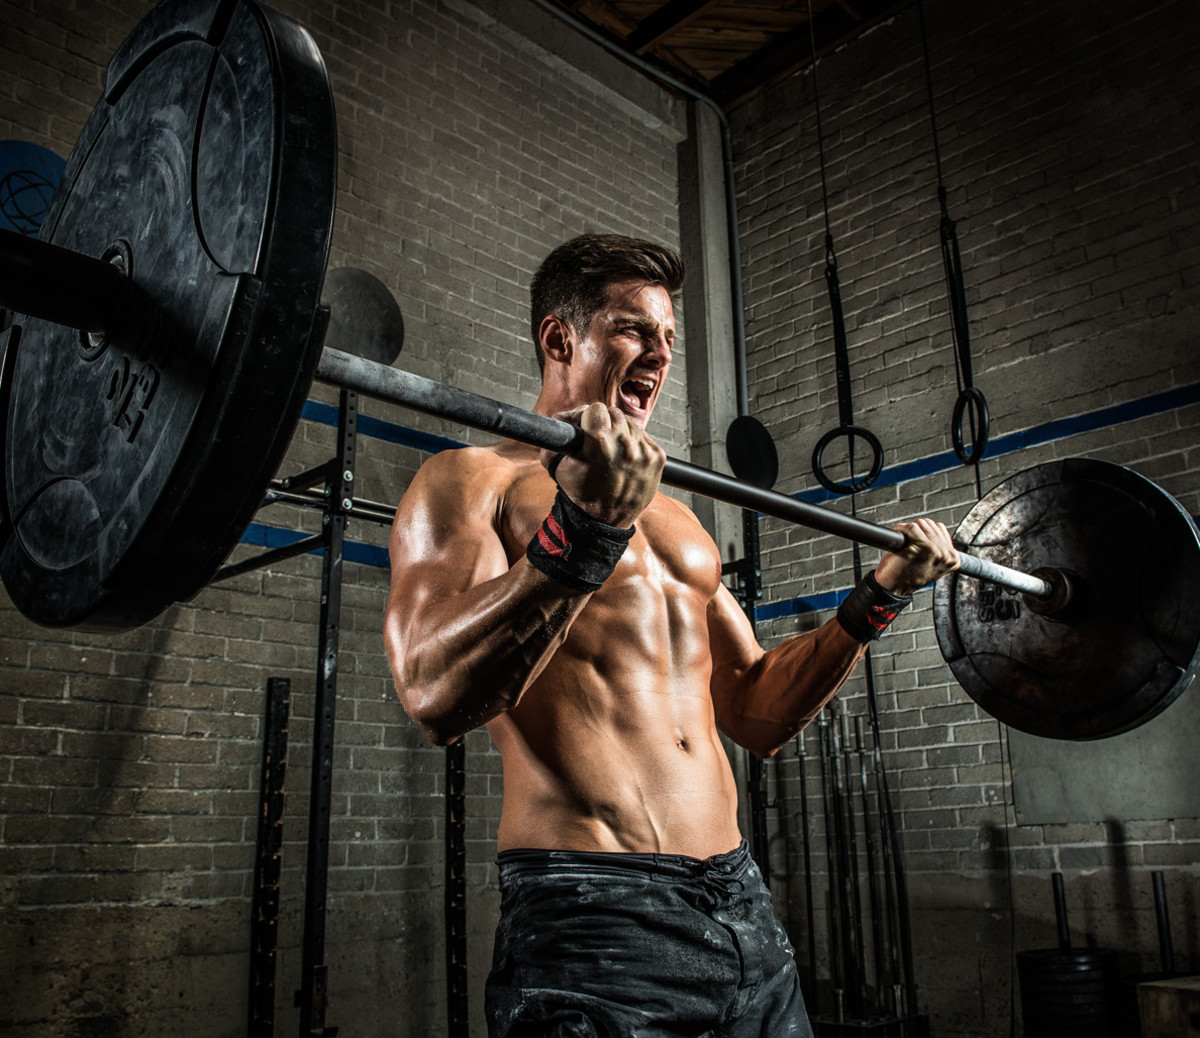 How to Use Drop Sets in Strength Training for More Muscle Gains